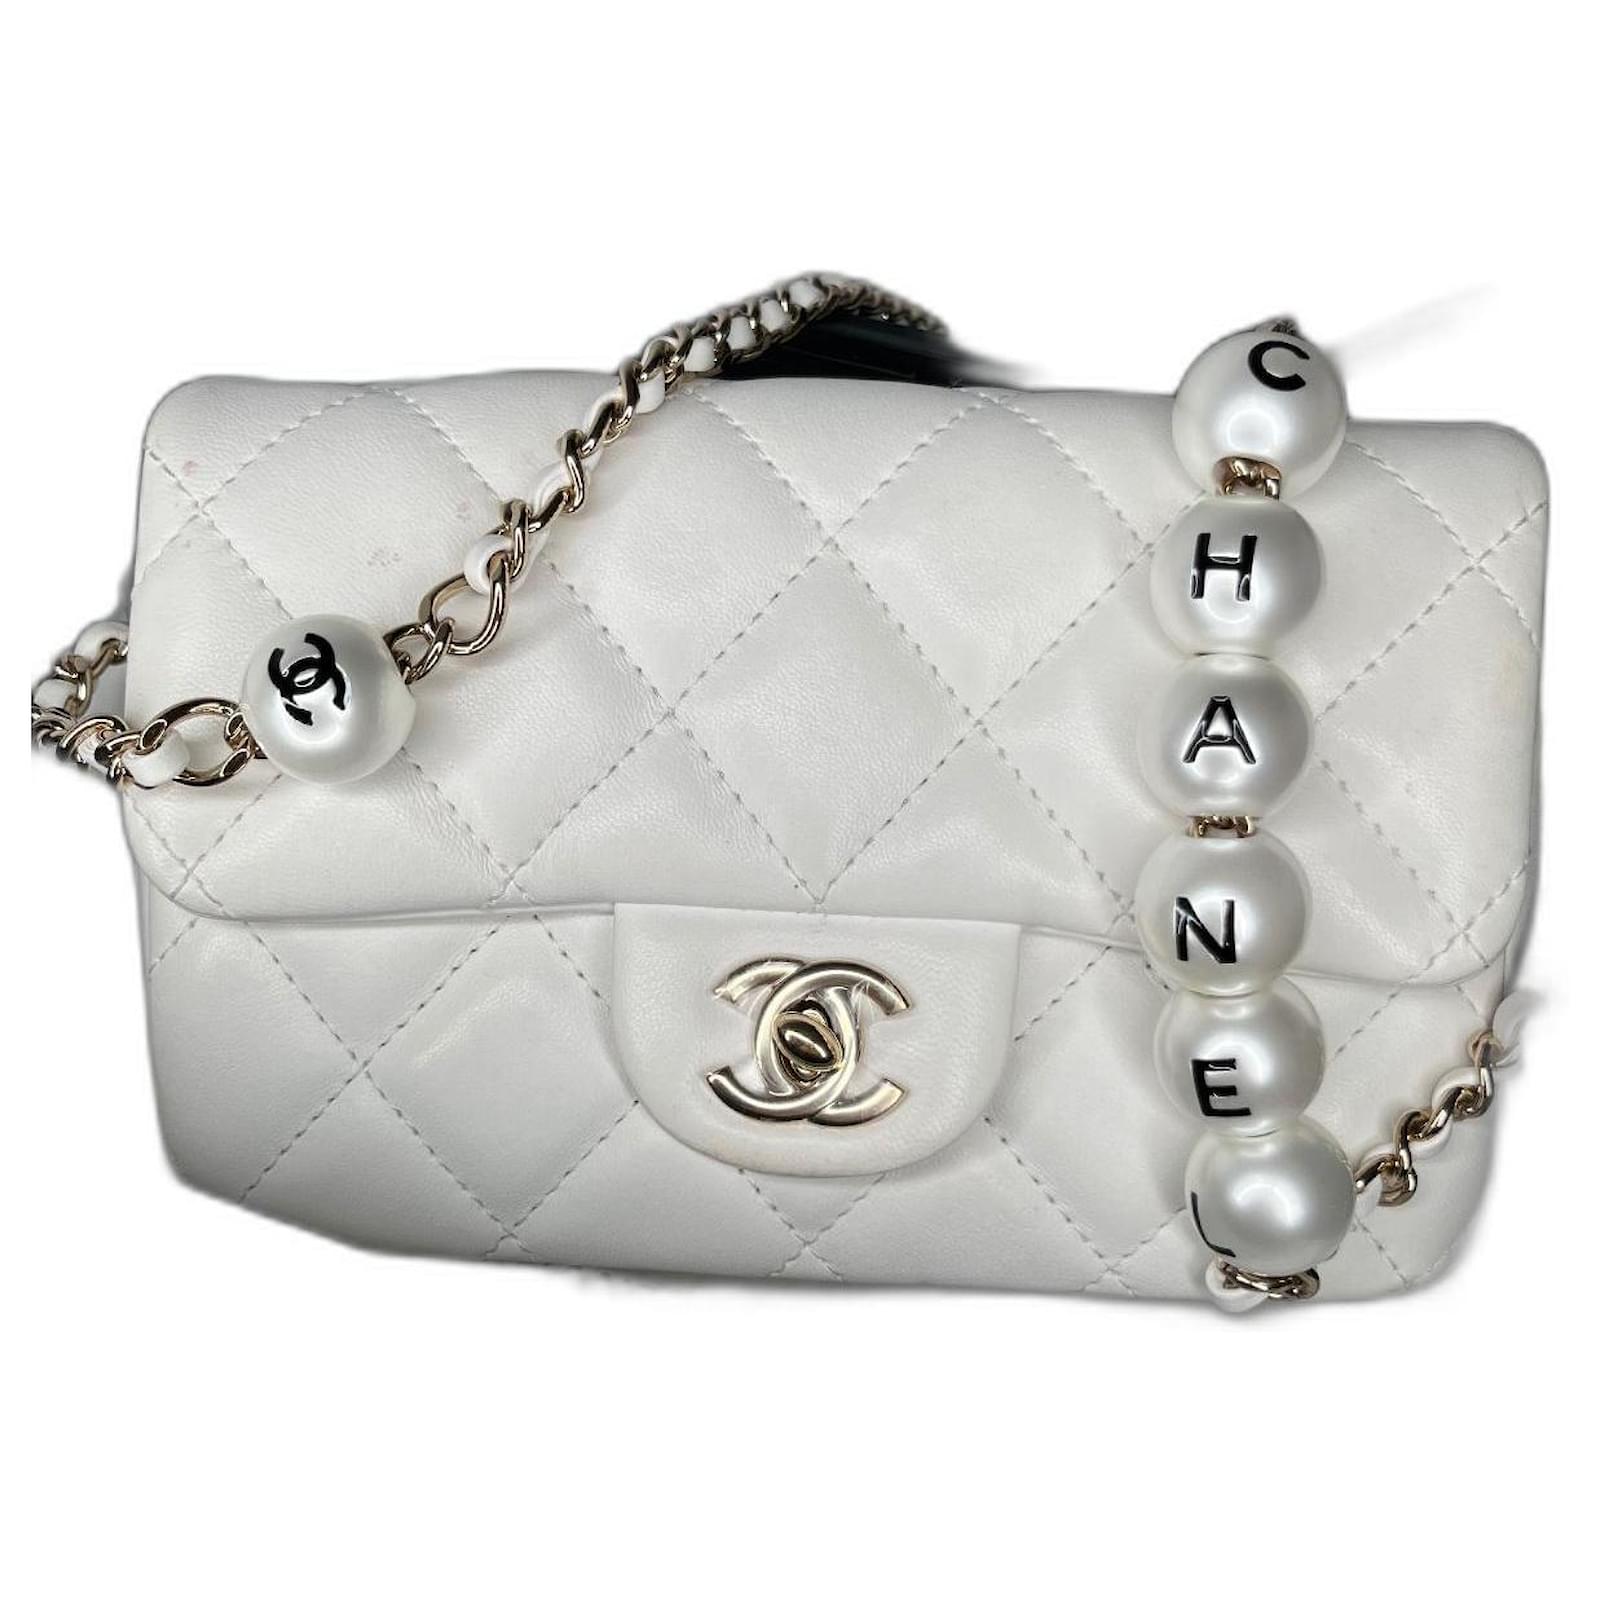 CHANEL Lambskin Quilted Pearl Mini About Pearls Drawstring Bag White 774396